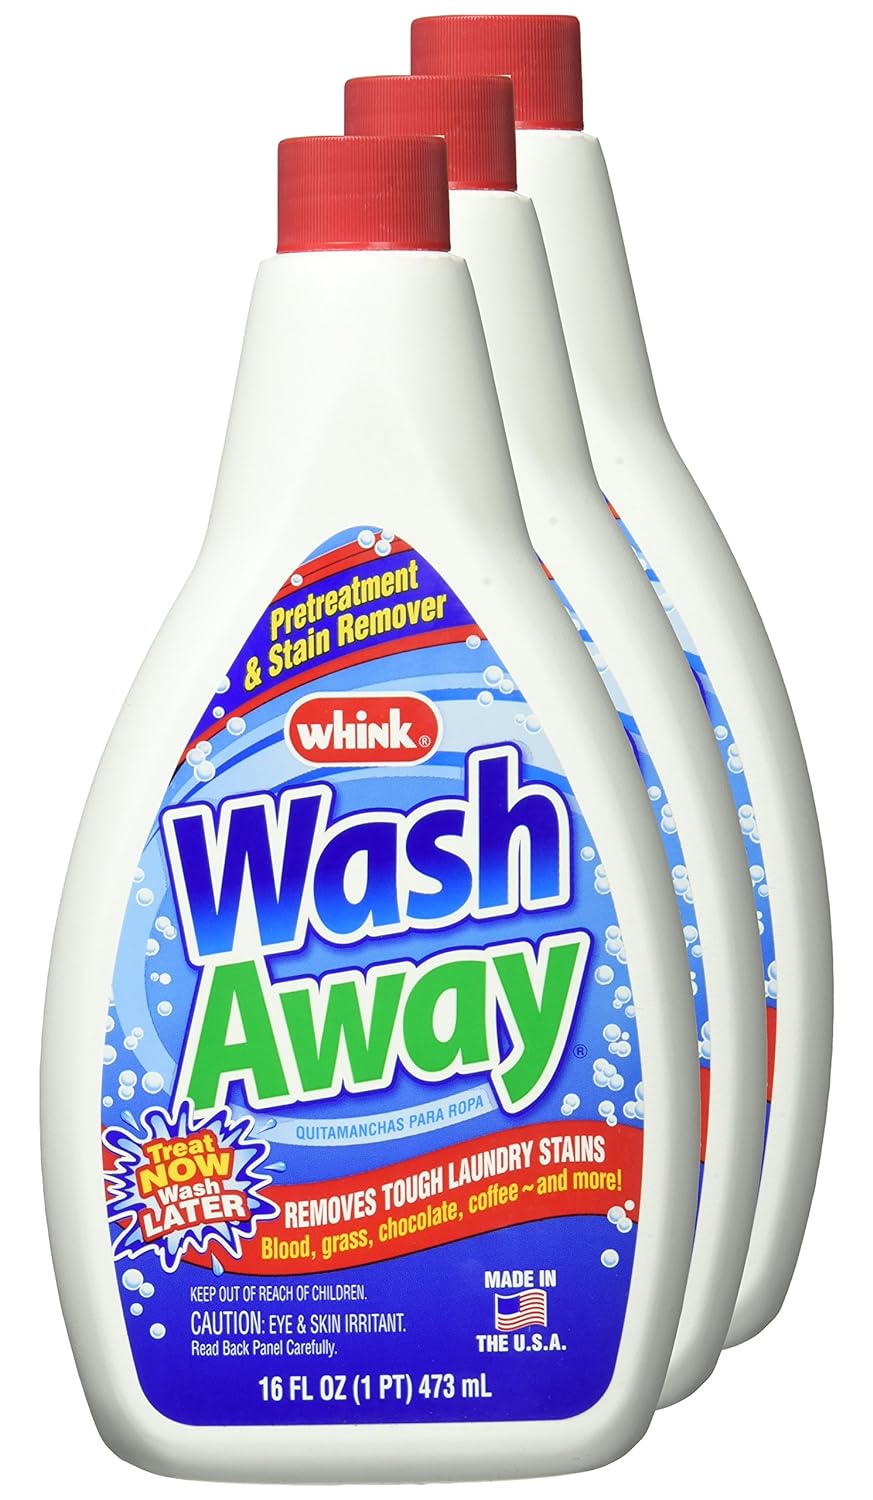 Whink - Wash Away Laundry Stain Remover for Tough Laundry Stains - 16oz, 6 Pack : Health & Household